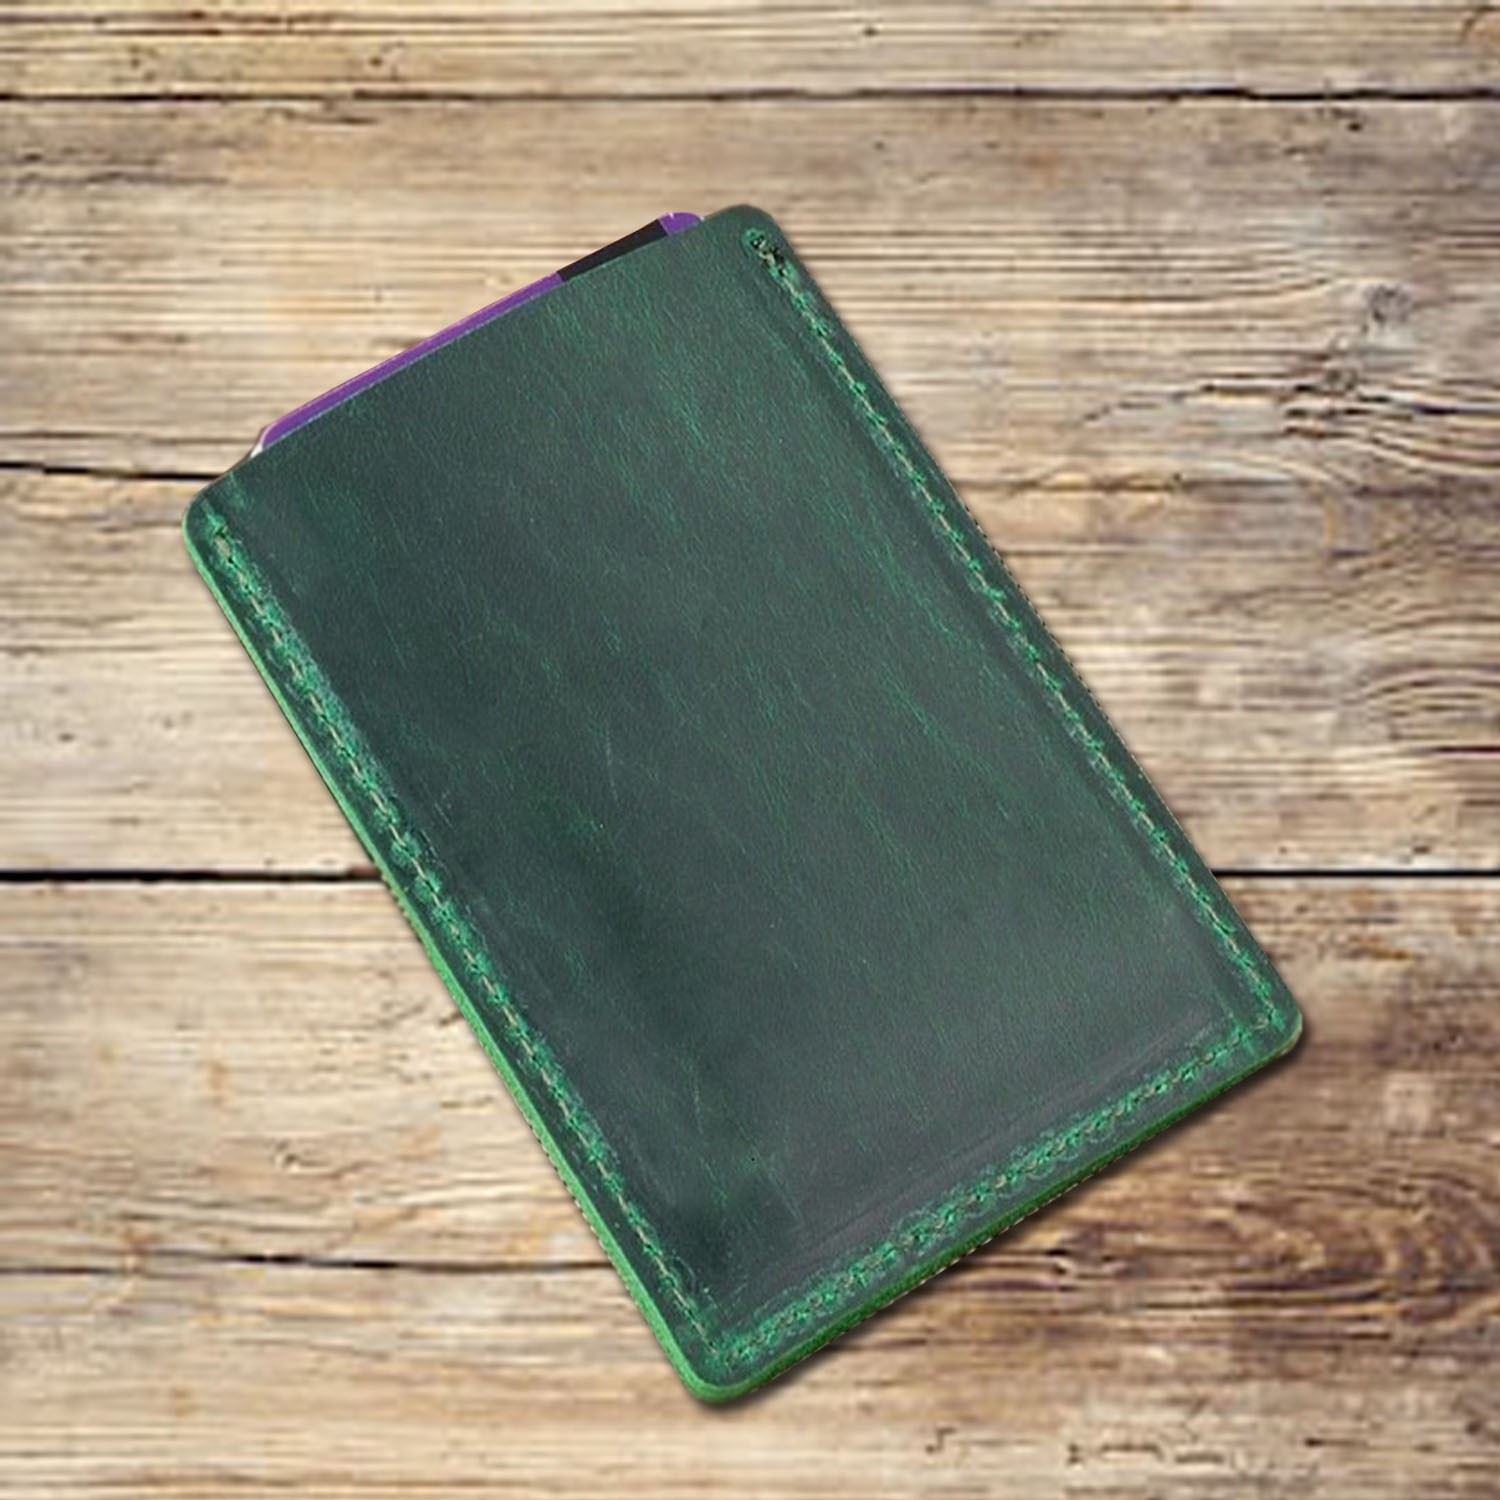 2 slots green leather card wallet